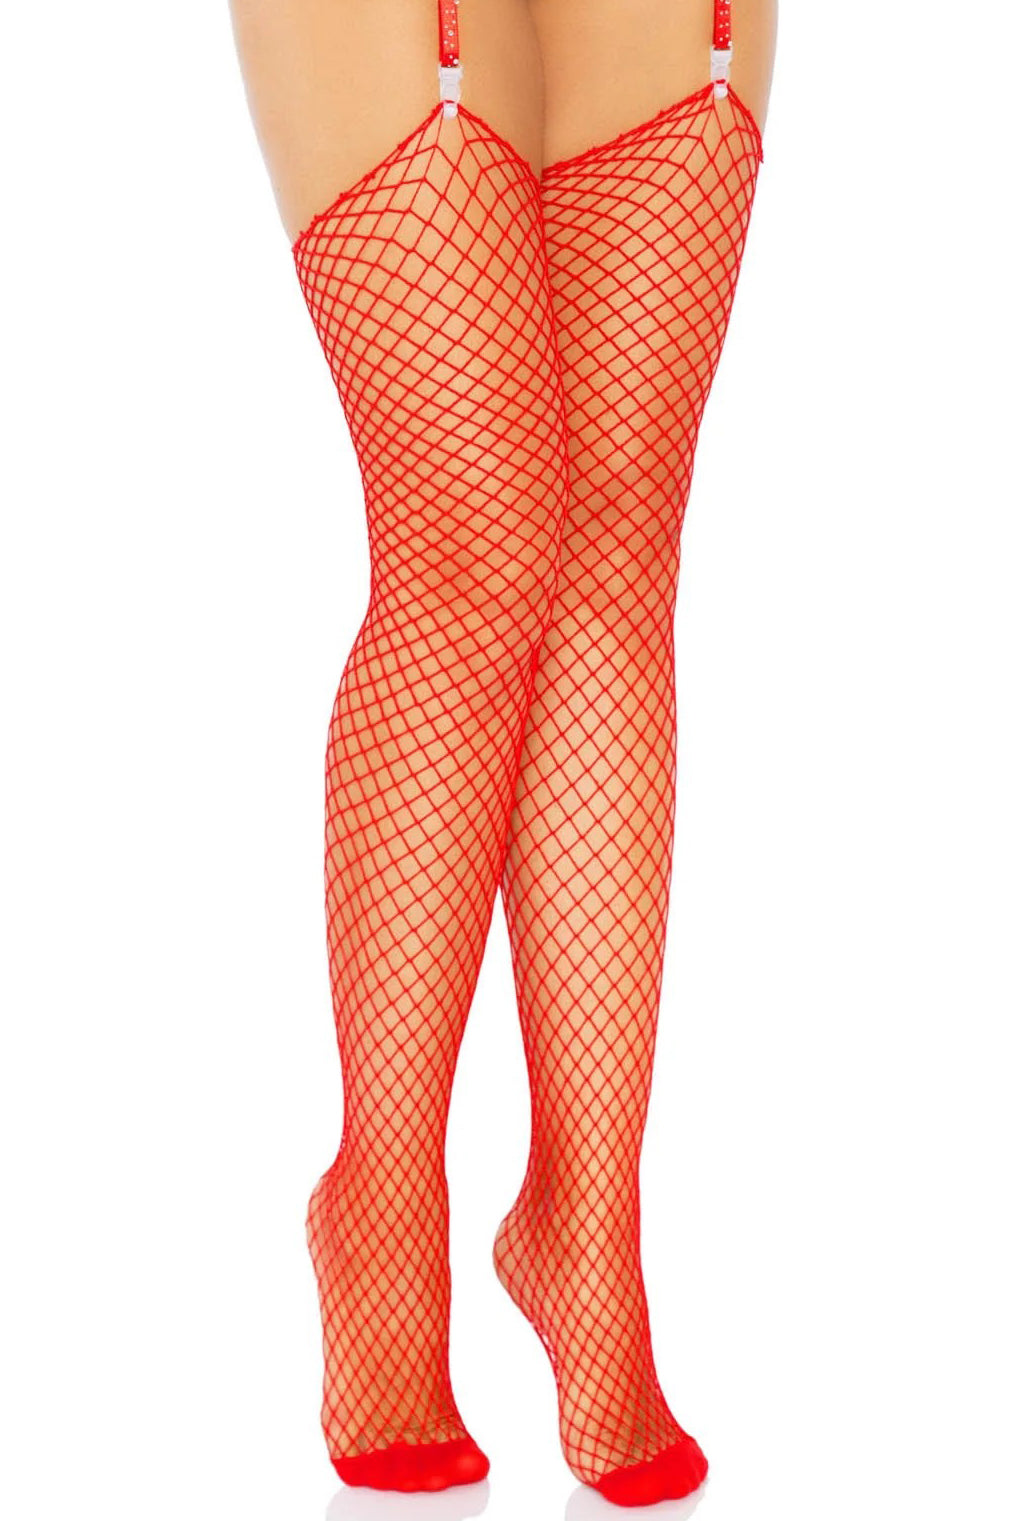 UK fast postage small hole diamond Red fishnet tights fishnets